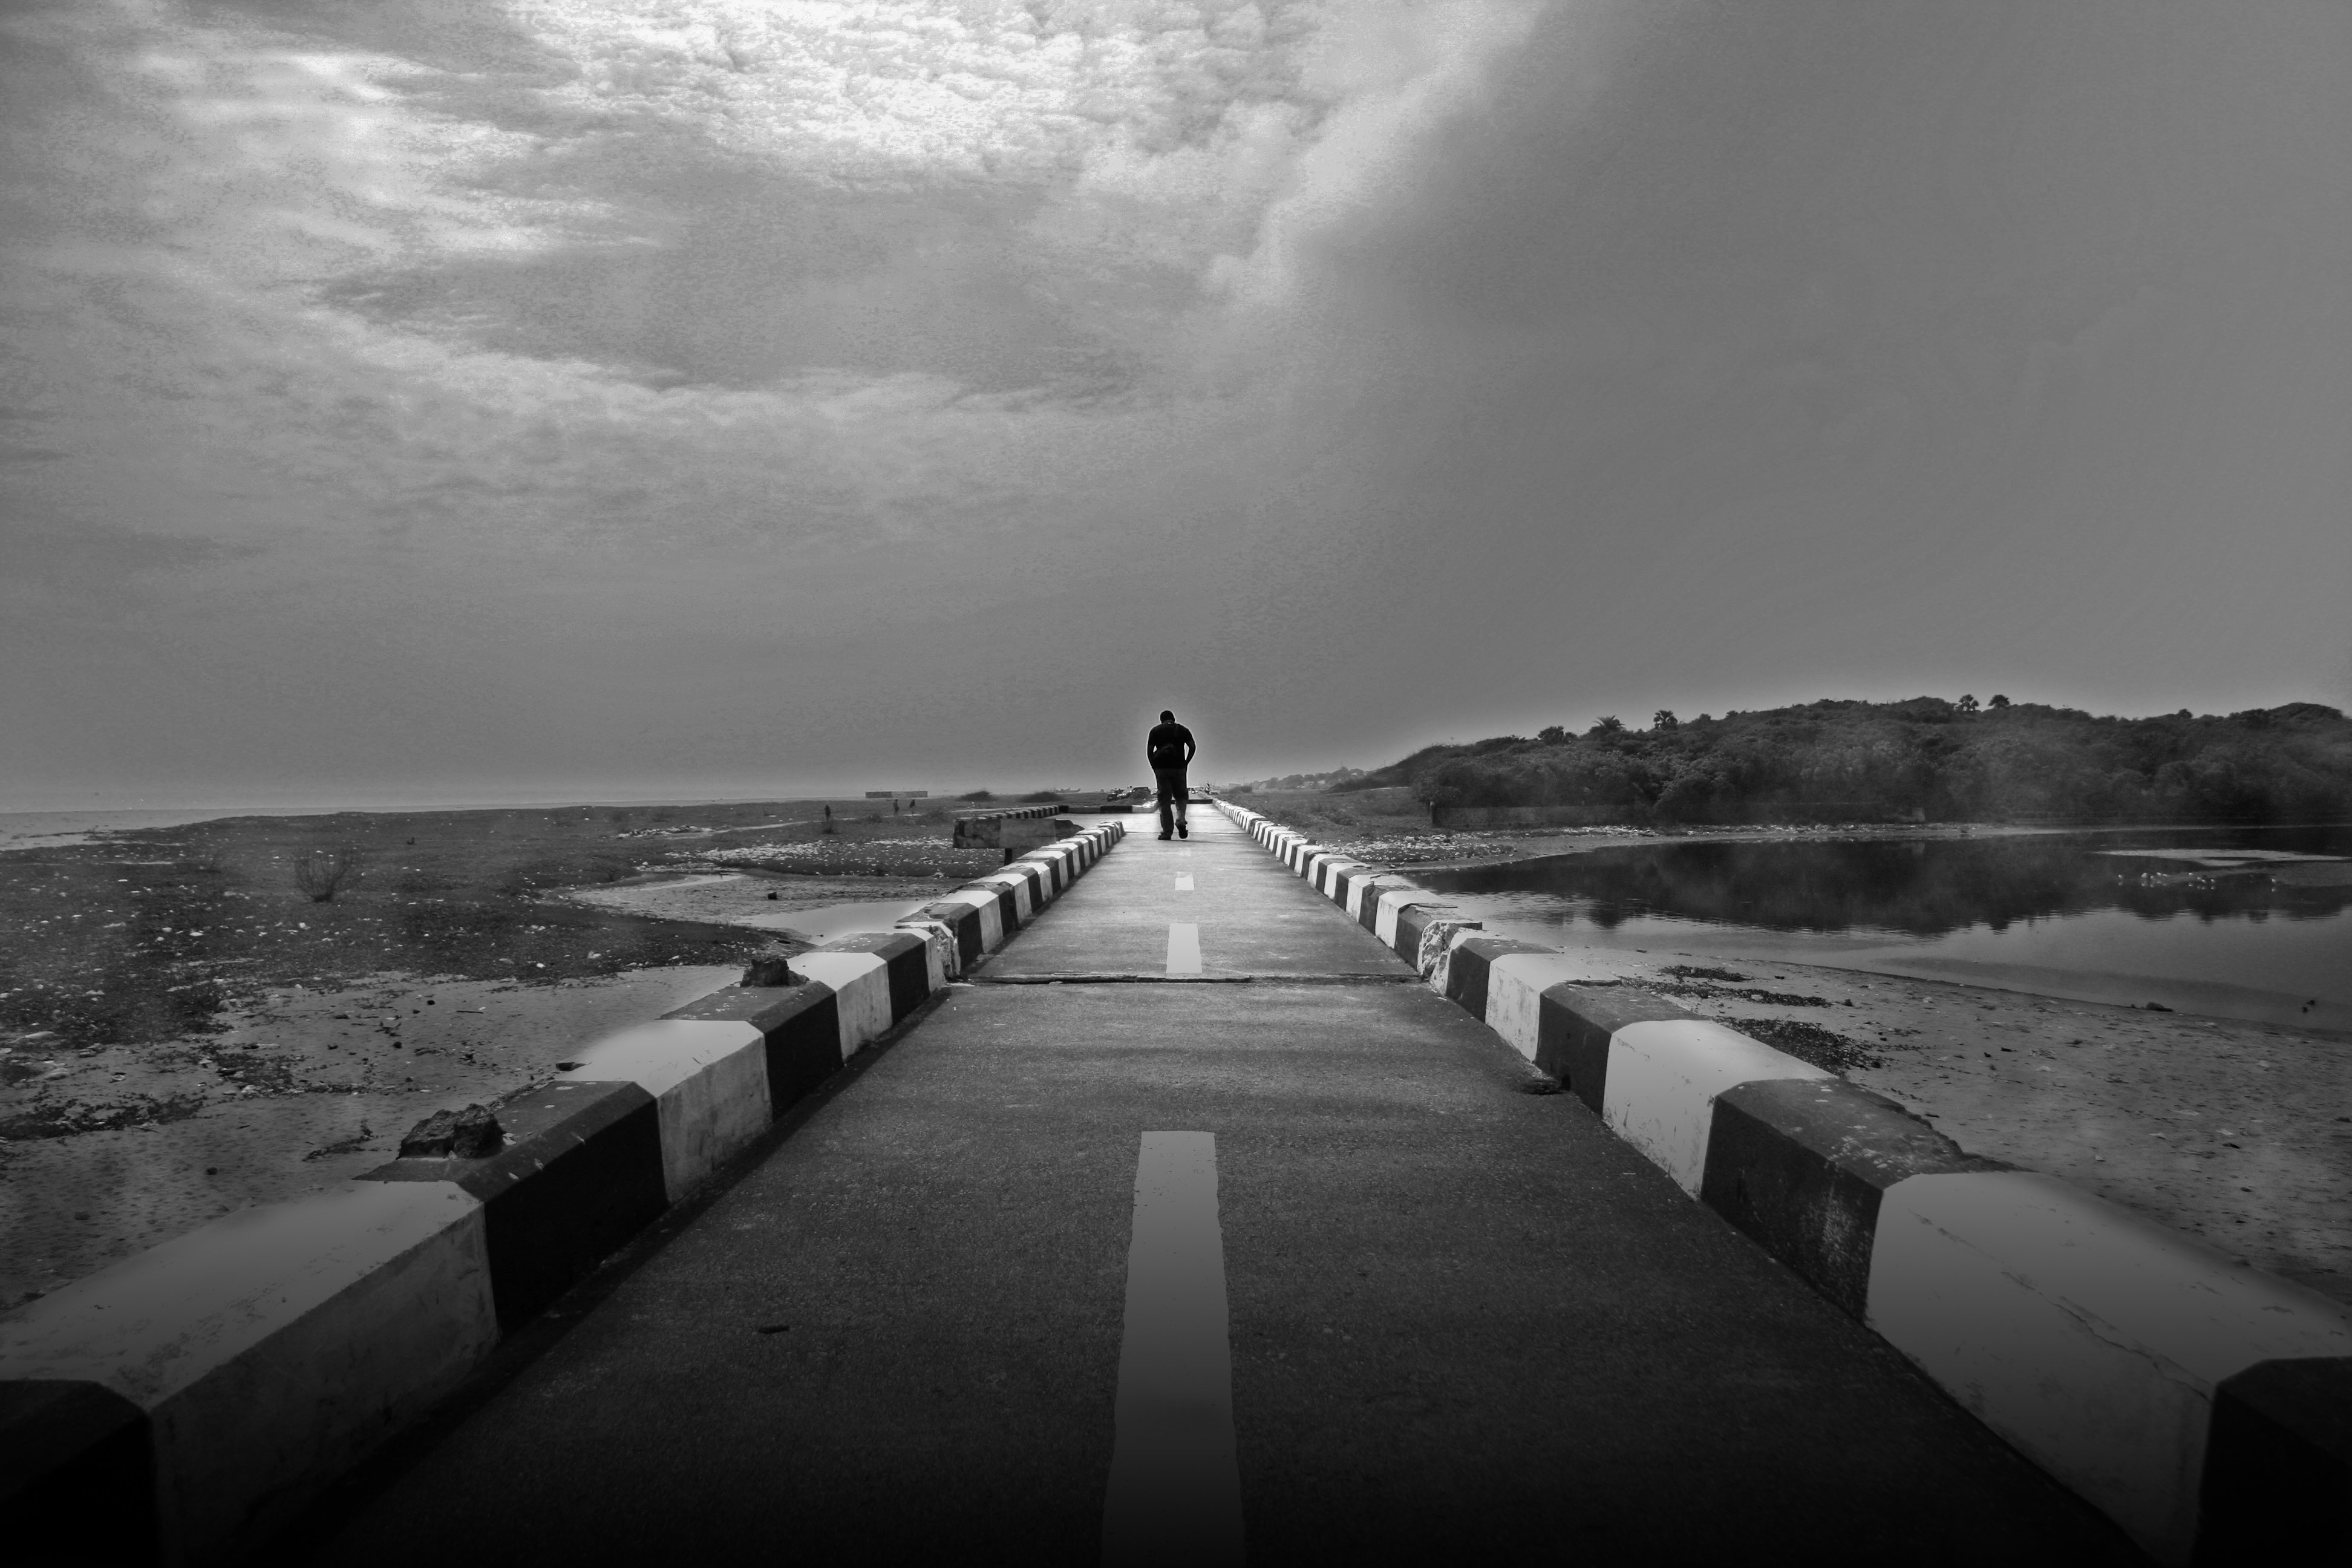 lonely, Mood, Sad, Alone, Sadness, Emotion, People, Loneliness, Solitude, Road Wallpaper